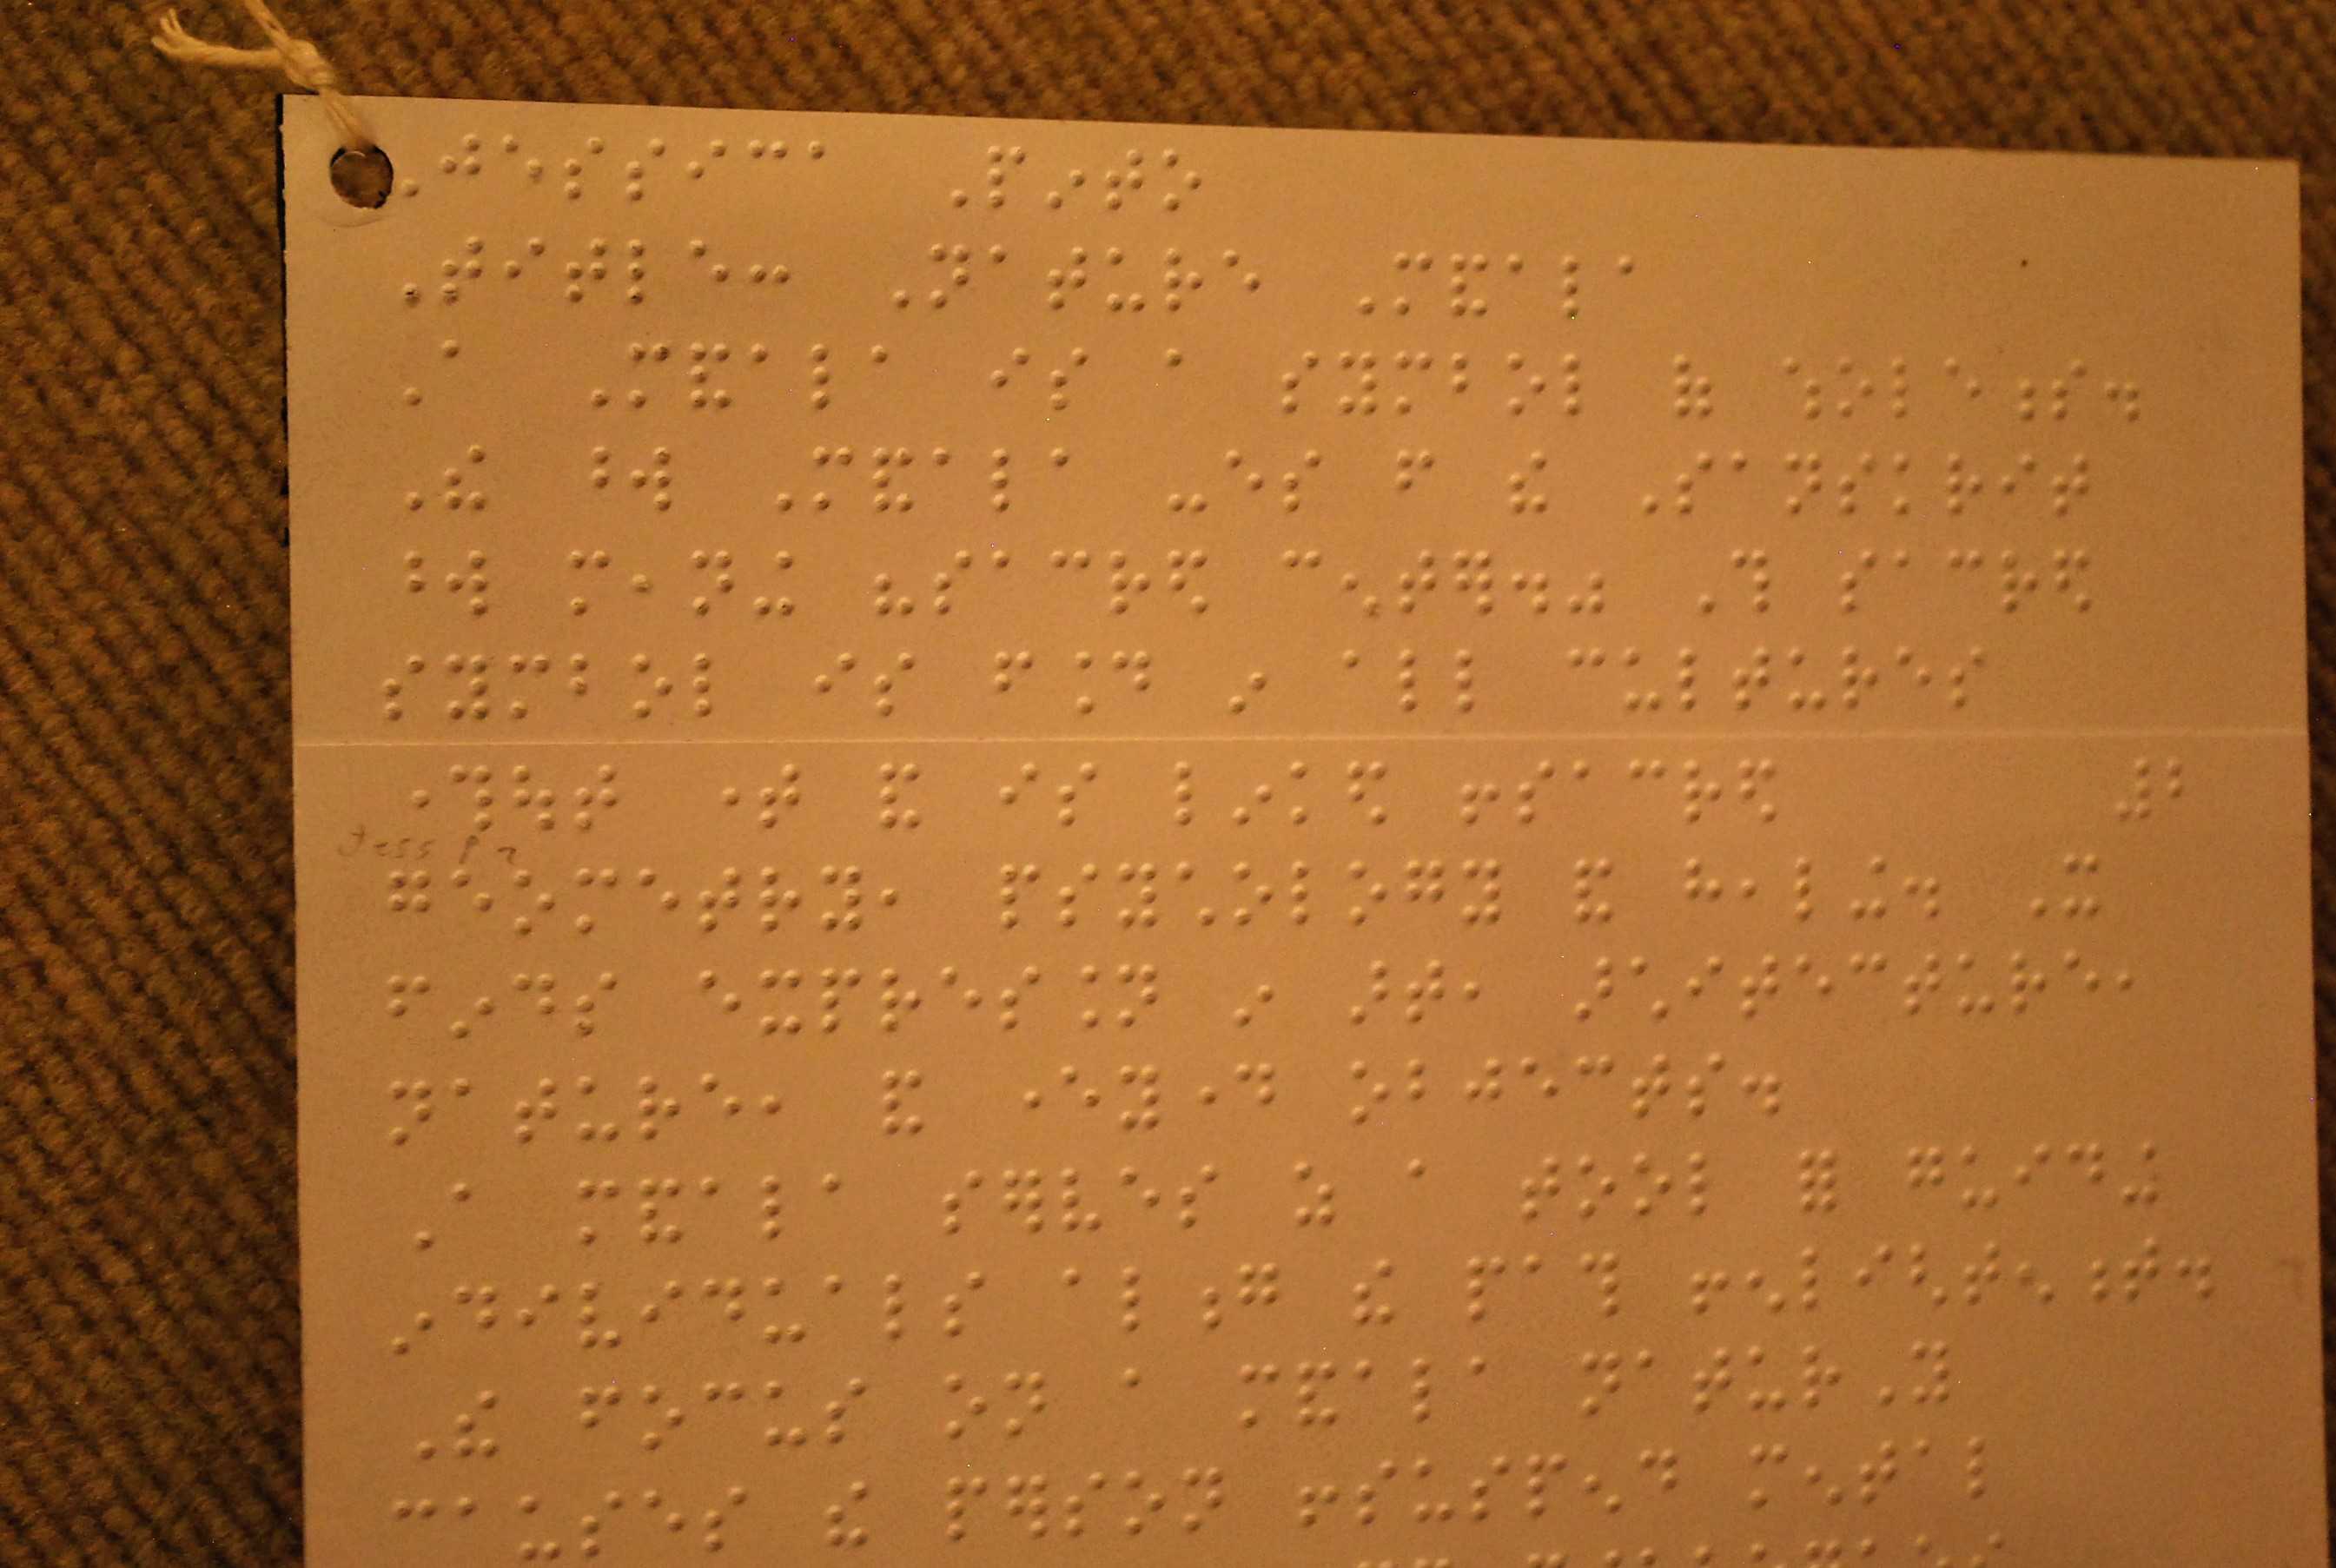 Braille on one side of each display card, visual text on the other.